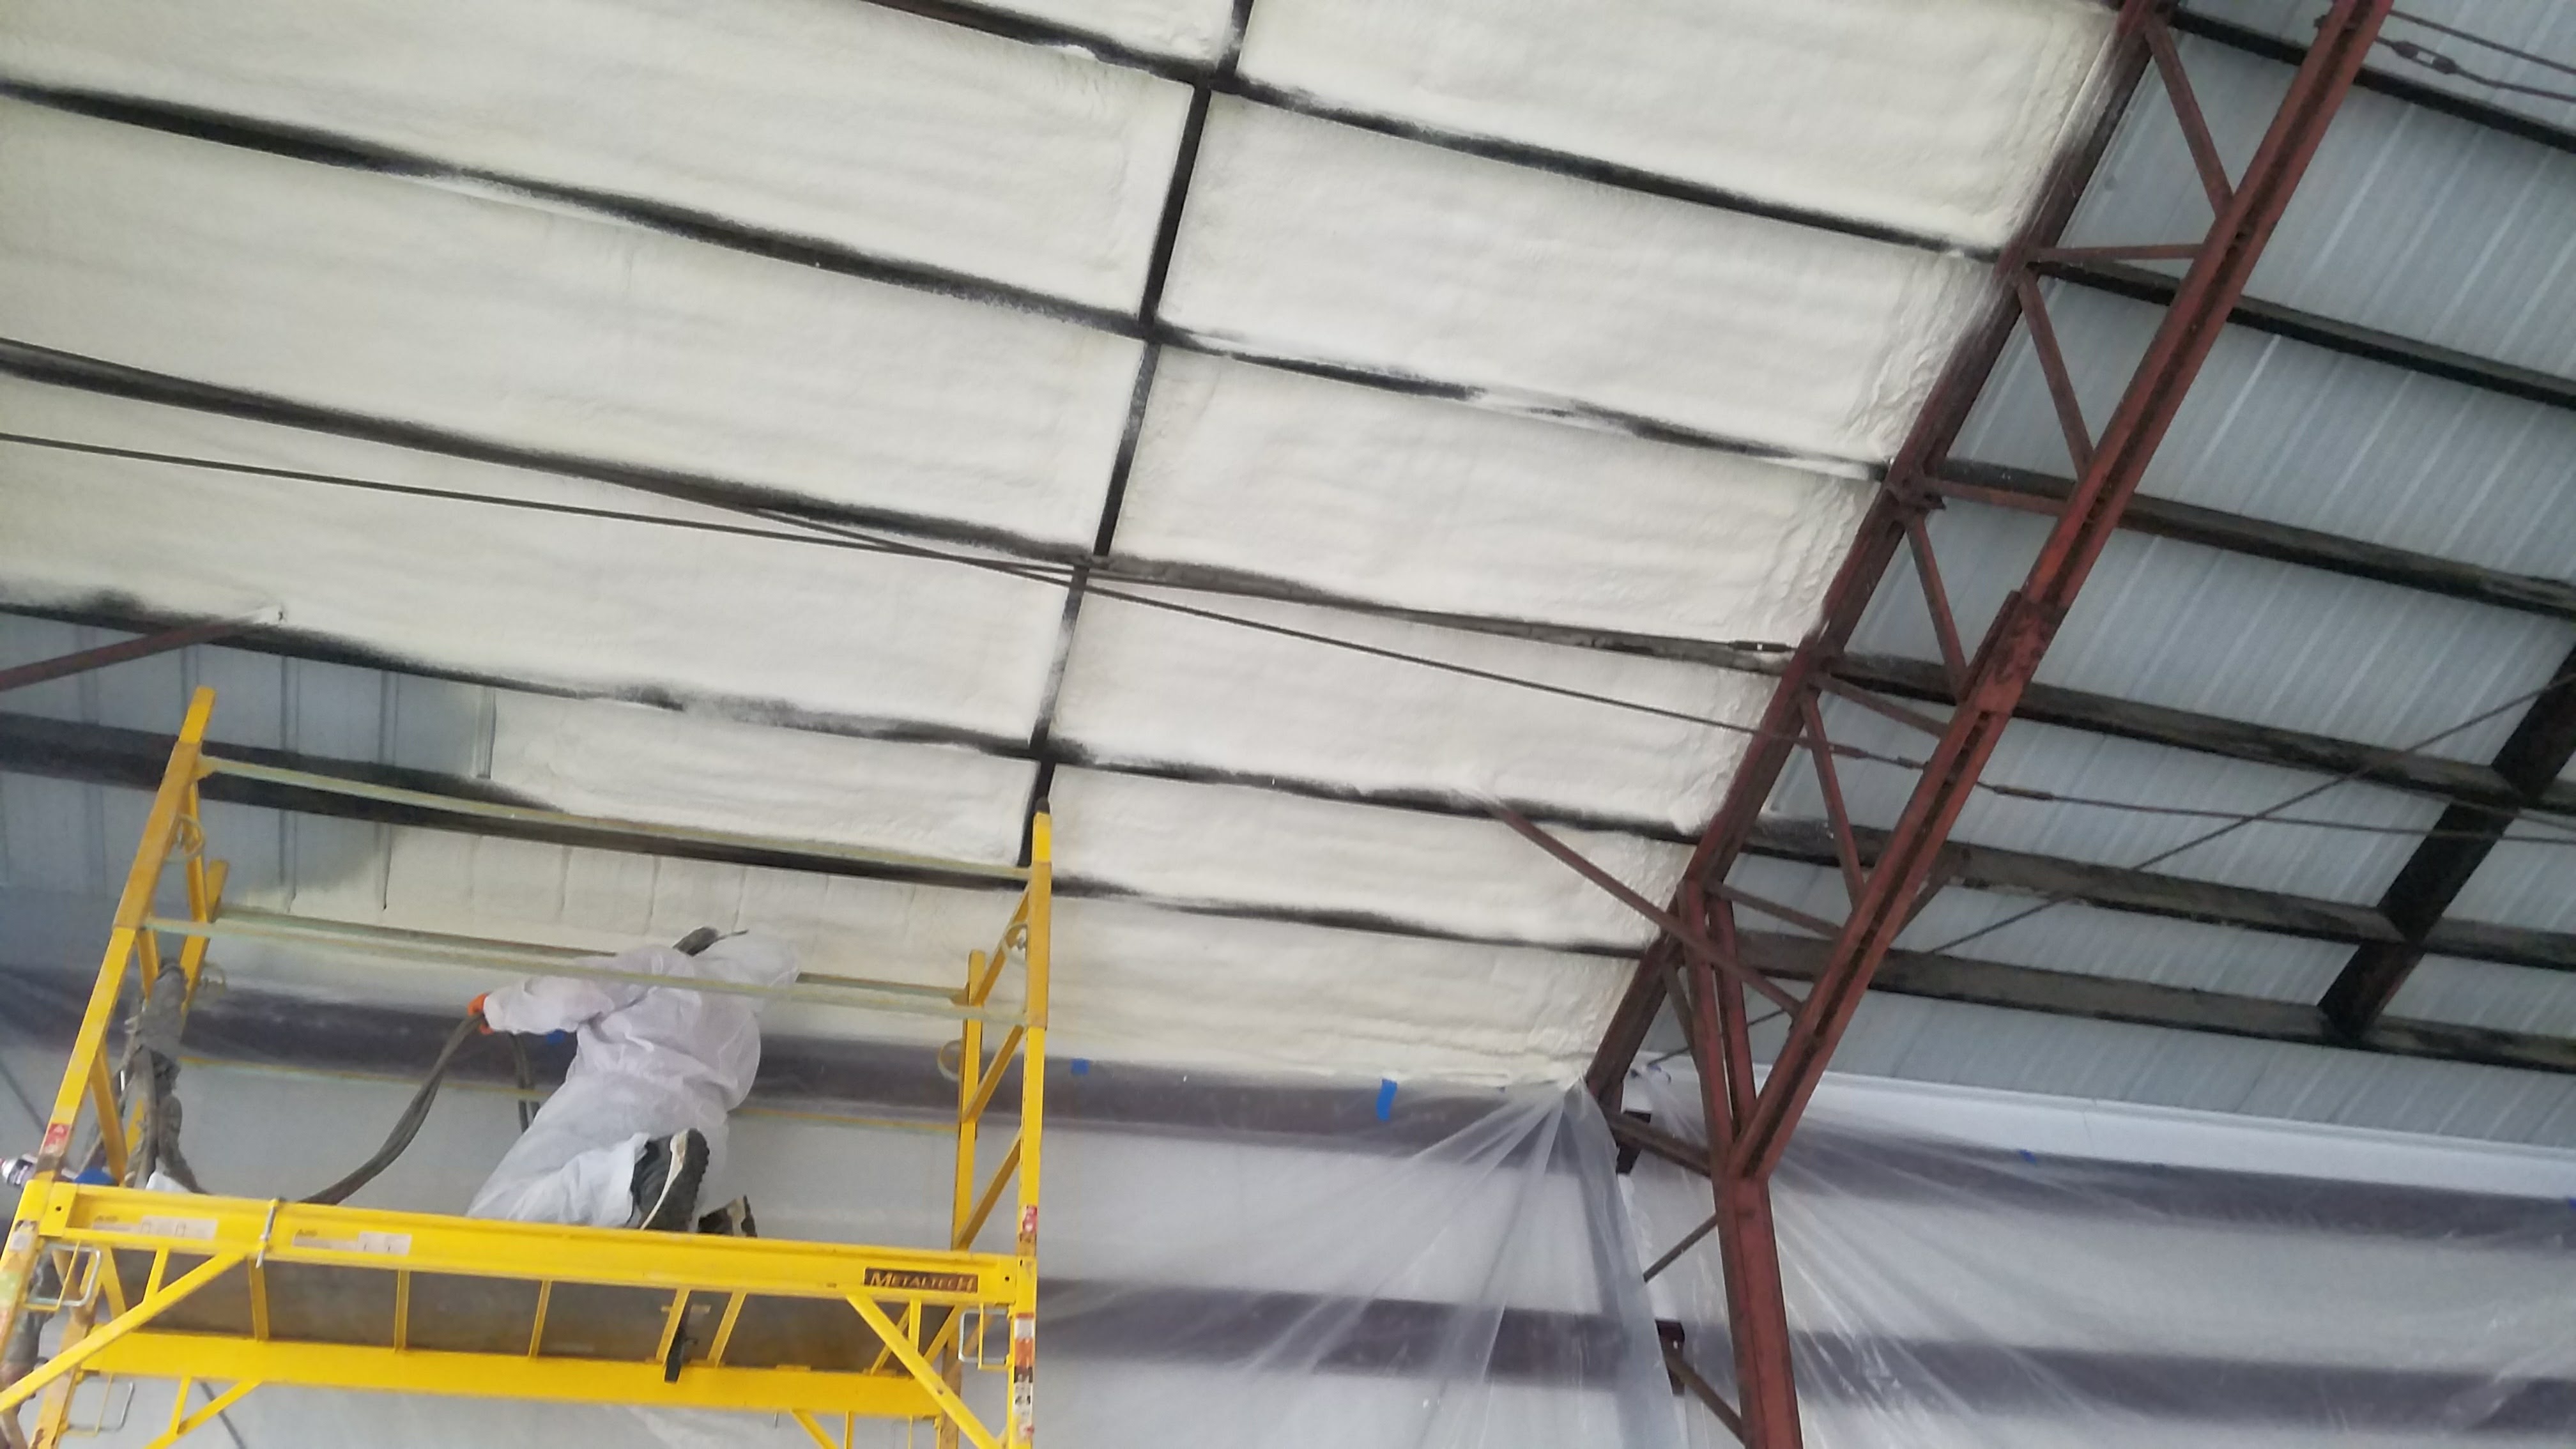 commercial-buildings-spray-foam-insulation-nyc---new-brunswick-ave-rahway-nj-07065-2 Staten Island NY | Commercial Buildings | Spray Foam Insulation Contractor